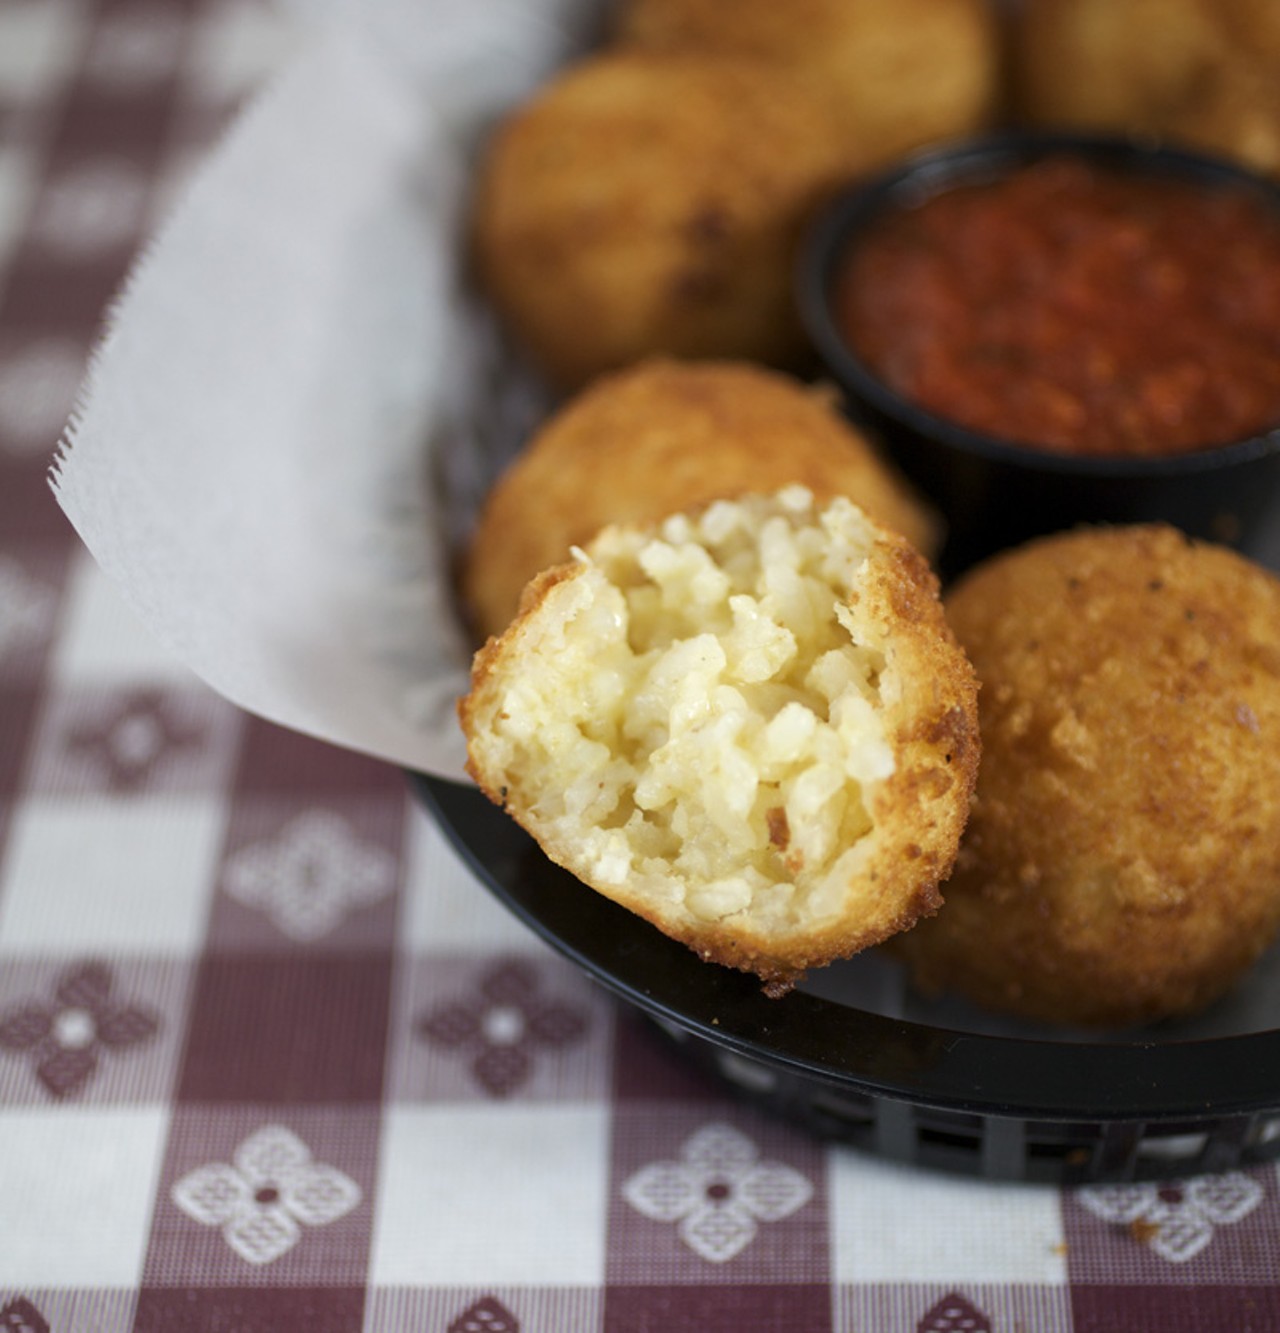 The Arancini appetizer is a Filomena's house specialty. They are housemade risotto croquettes, flash fried with a melted cheese center and served with marinara sauce.